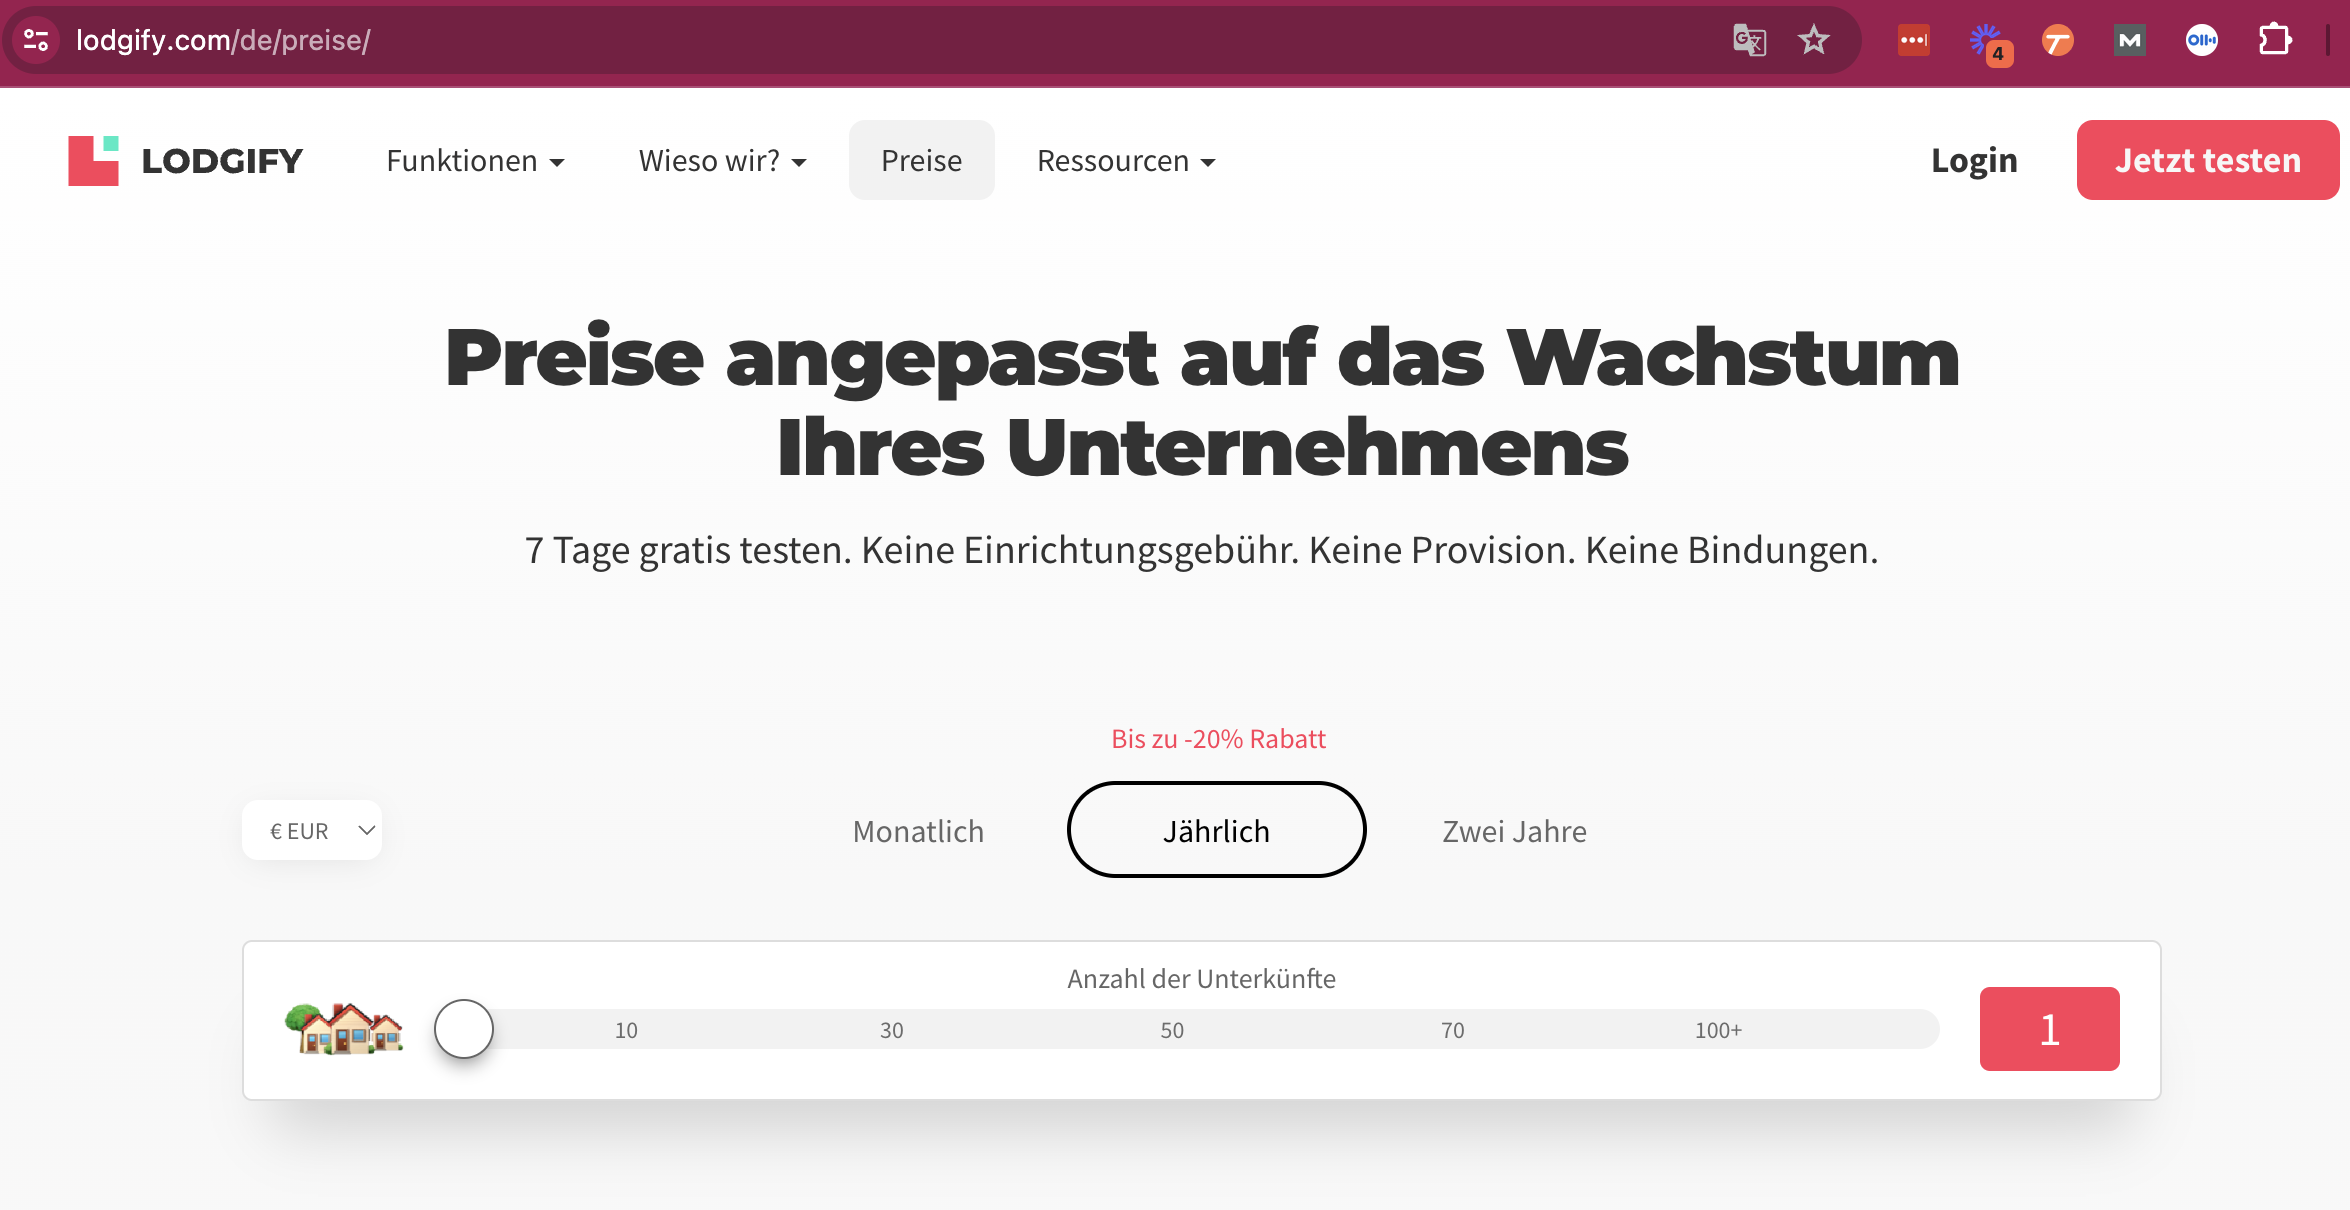 Screenshot of Lodgifies German Pricing Page, to compare against the English pricing page and show the different URL structures and hreflang tags